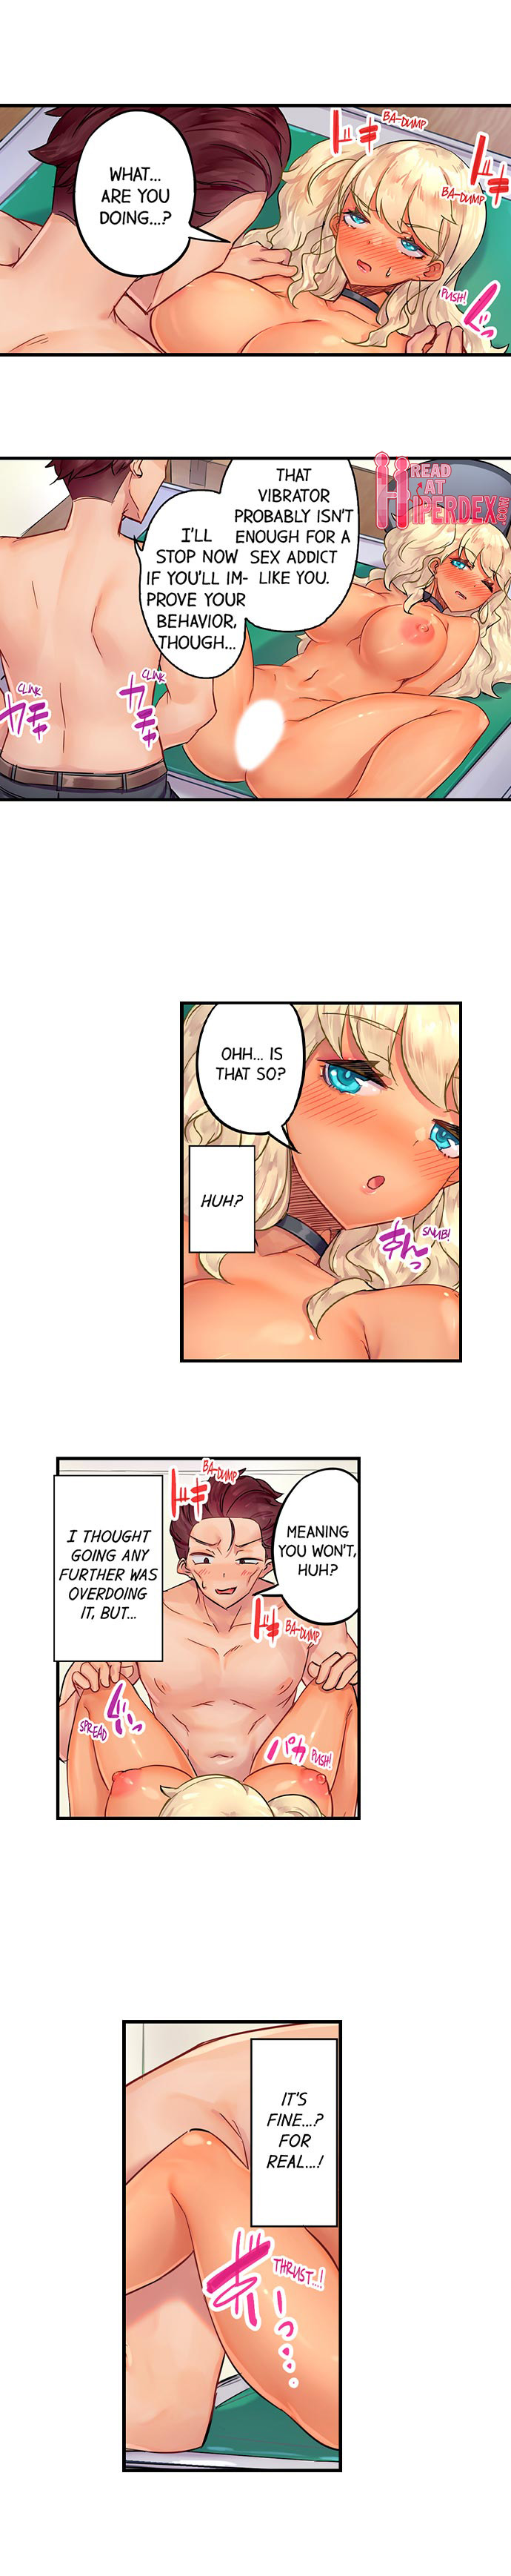 Orgasm Management for This Tanned Girl - Chapter 4 Page 2